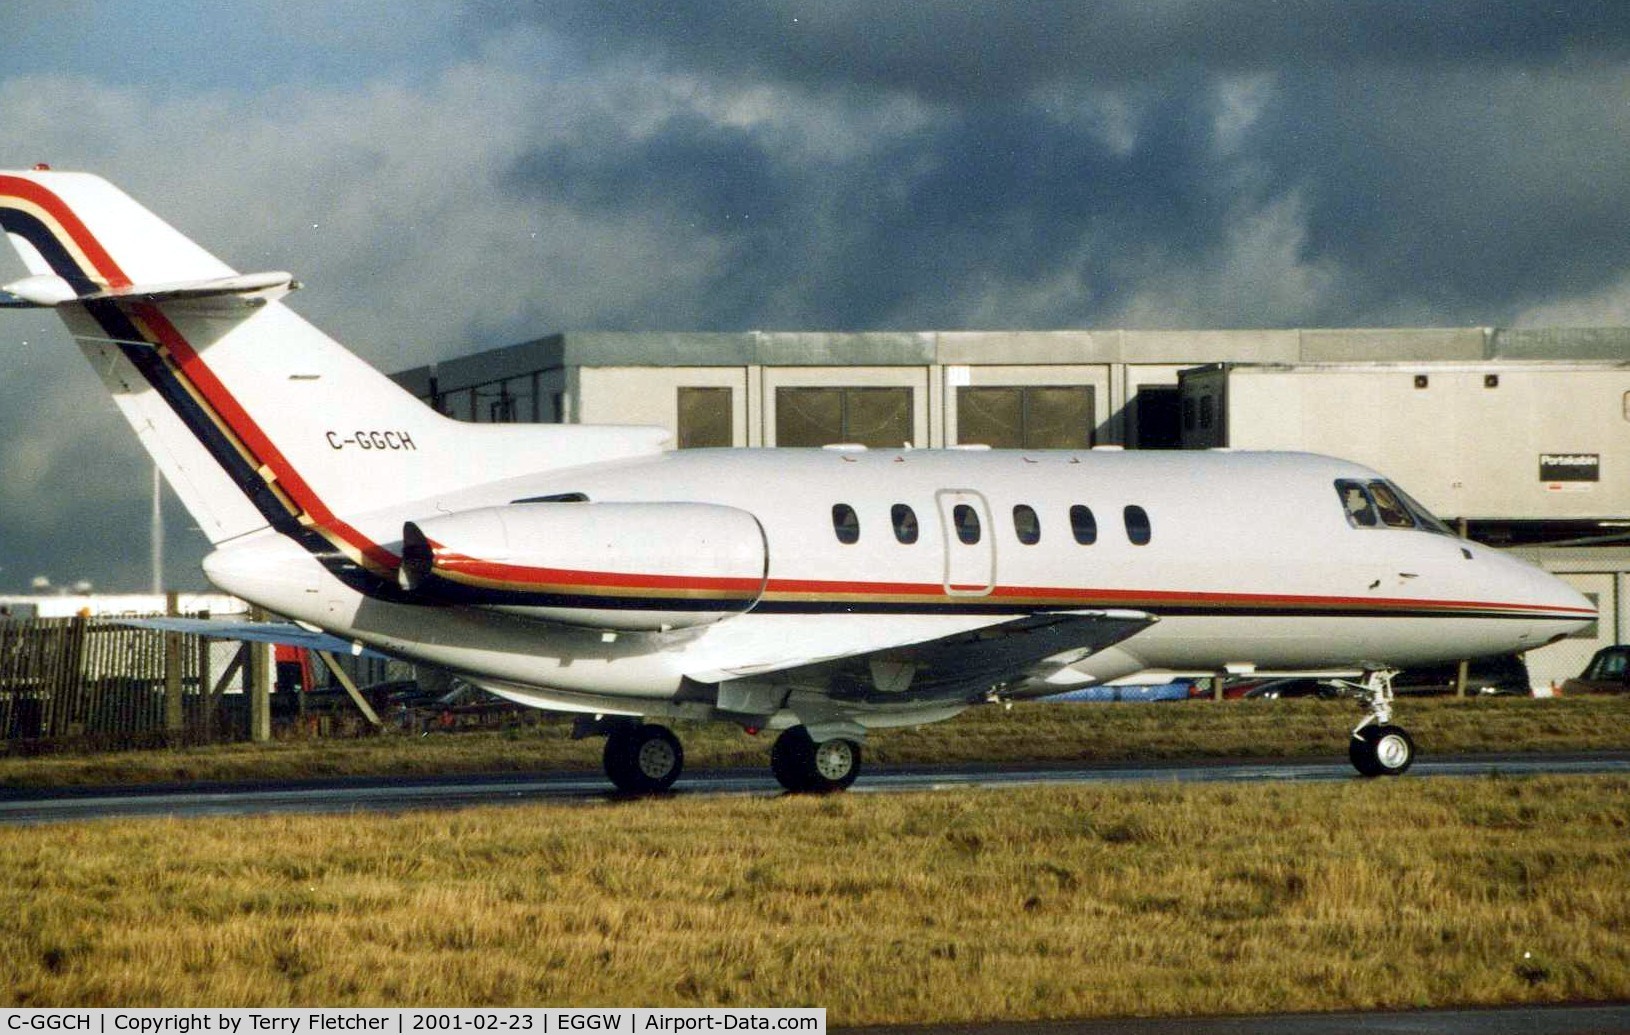 C-GGCH, 2000 Raytheon Hawker 800XP C/N 258495, This registration was worn by a Hawker 800XP - before being re-registered 5B-CKL